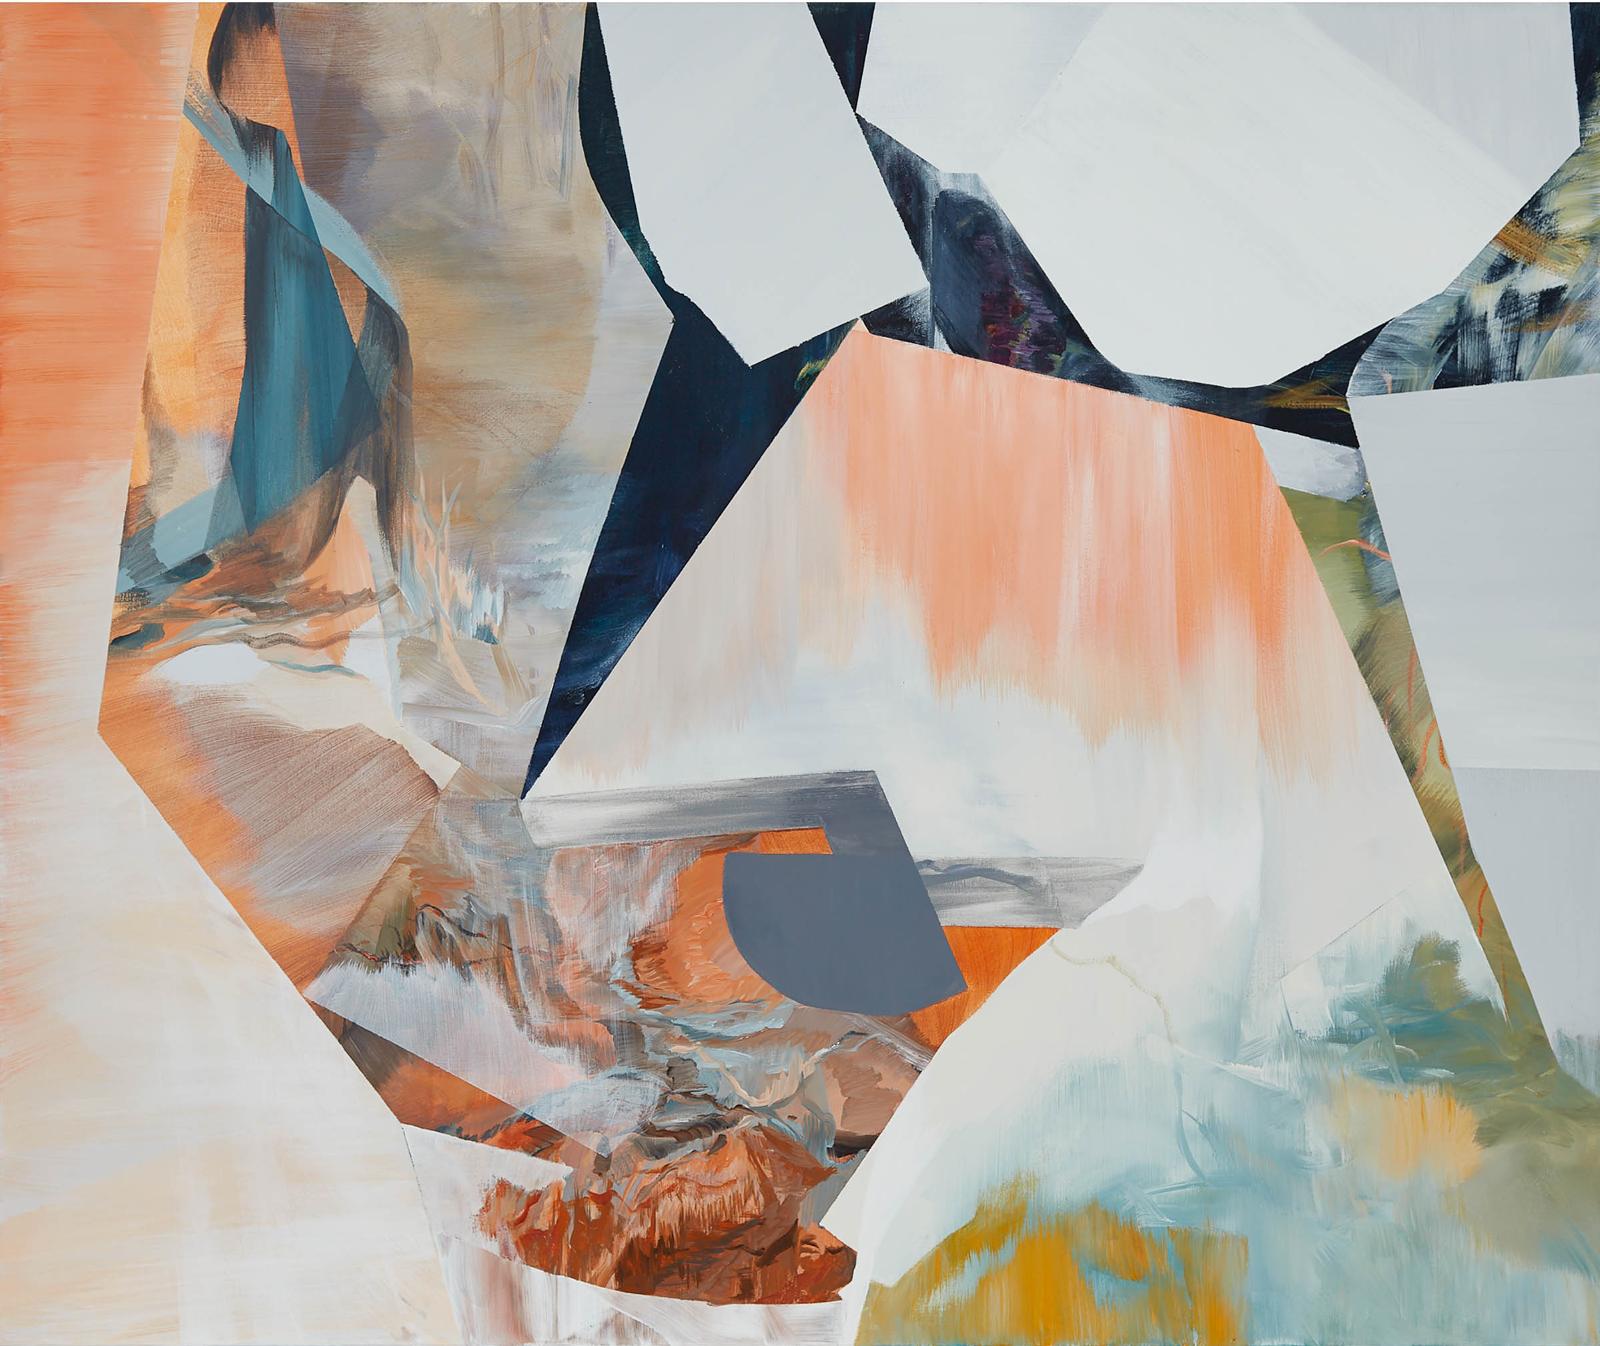 Melanie Authier (1980) - Fault Lines And Footholds, 2015